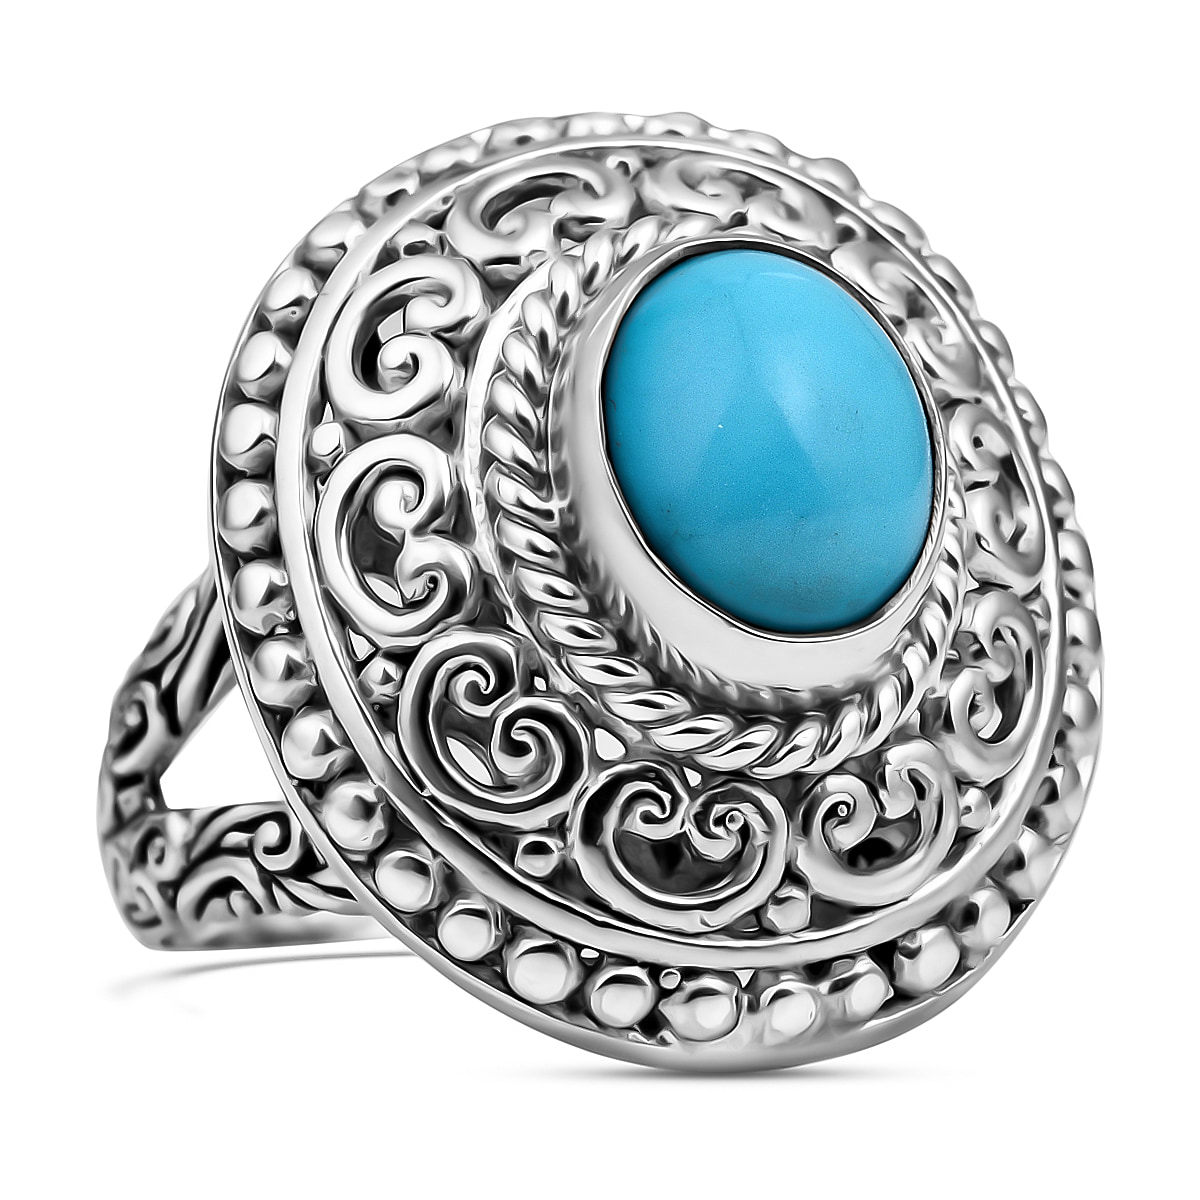 Royal Bali Collection - Arizona Sleeping Beauty Turquoise Ring in Sterling  Silver 2.35 Ct, Silver Wt. 7.50 Gms